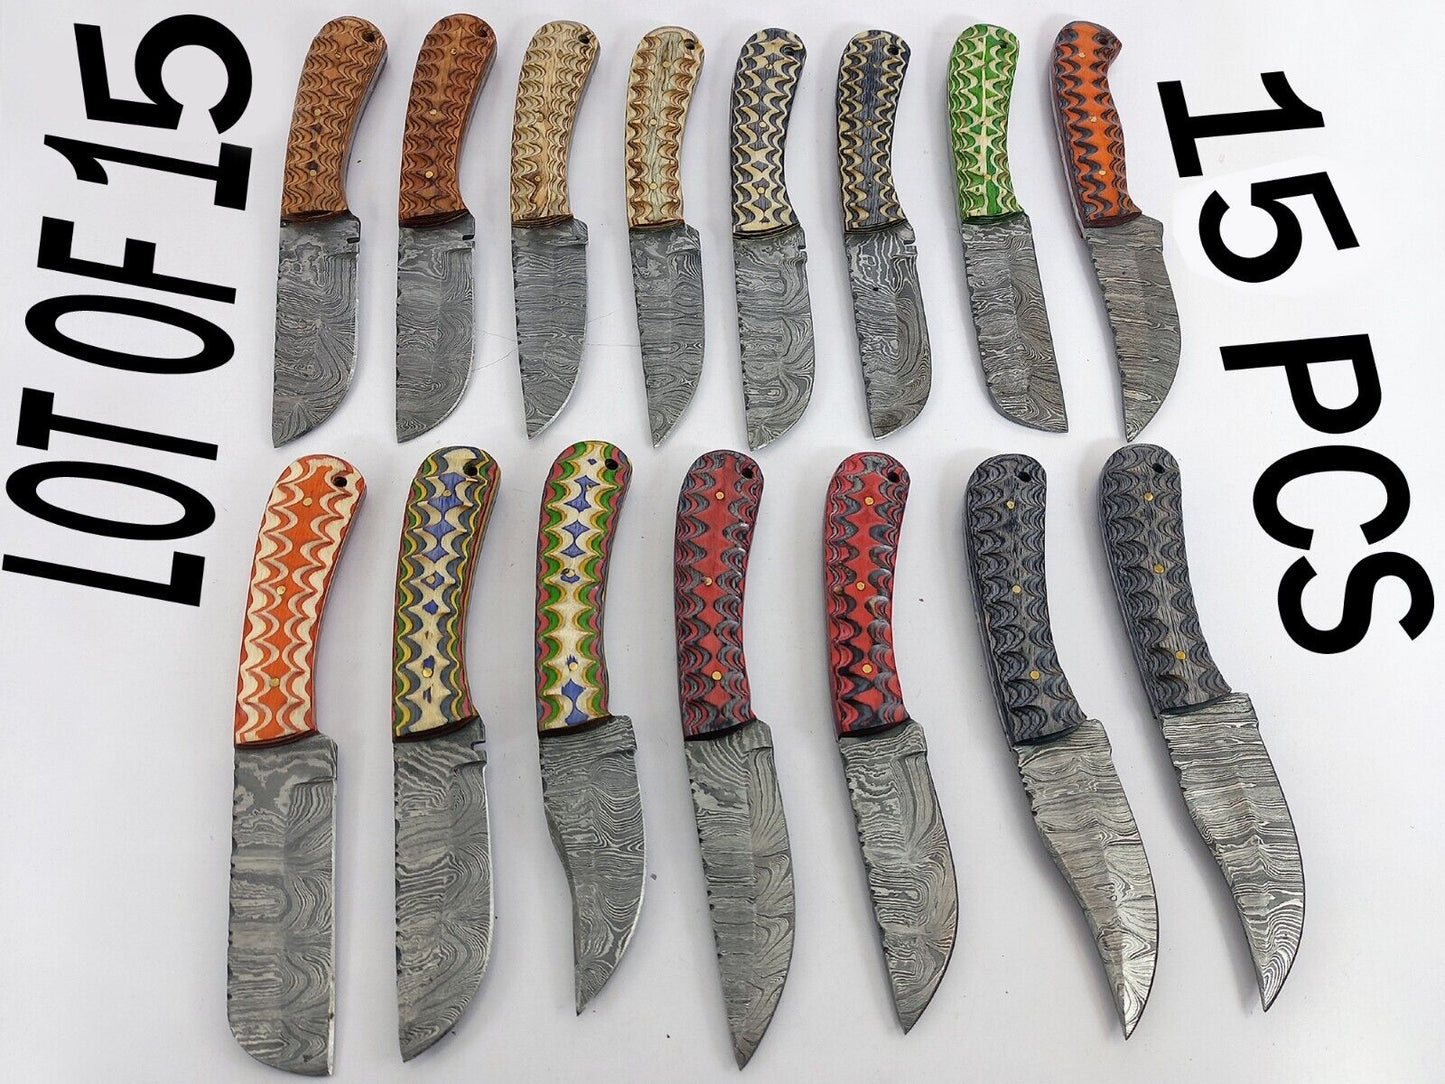 15 pieces Damascus steel fixed blade skinning knives lot with Leather sheath. Over 95 inches long Damascus steel knives in assorted colors